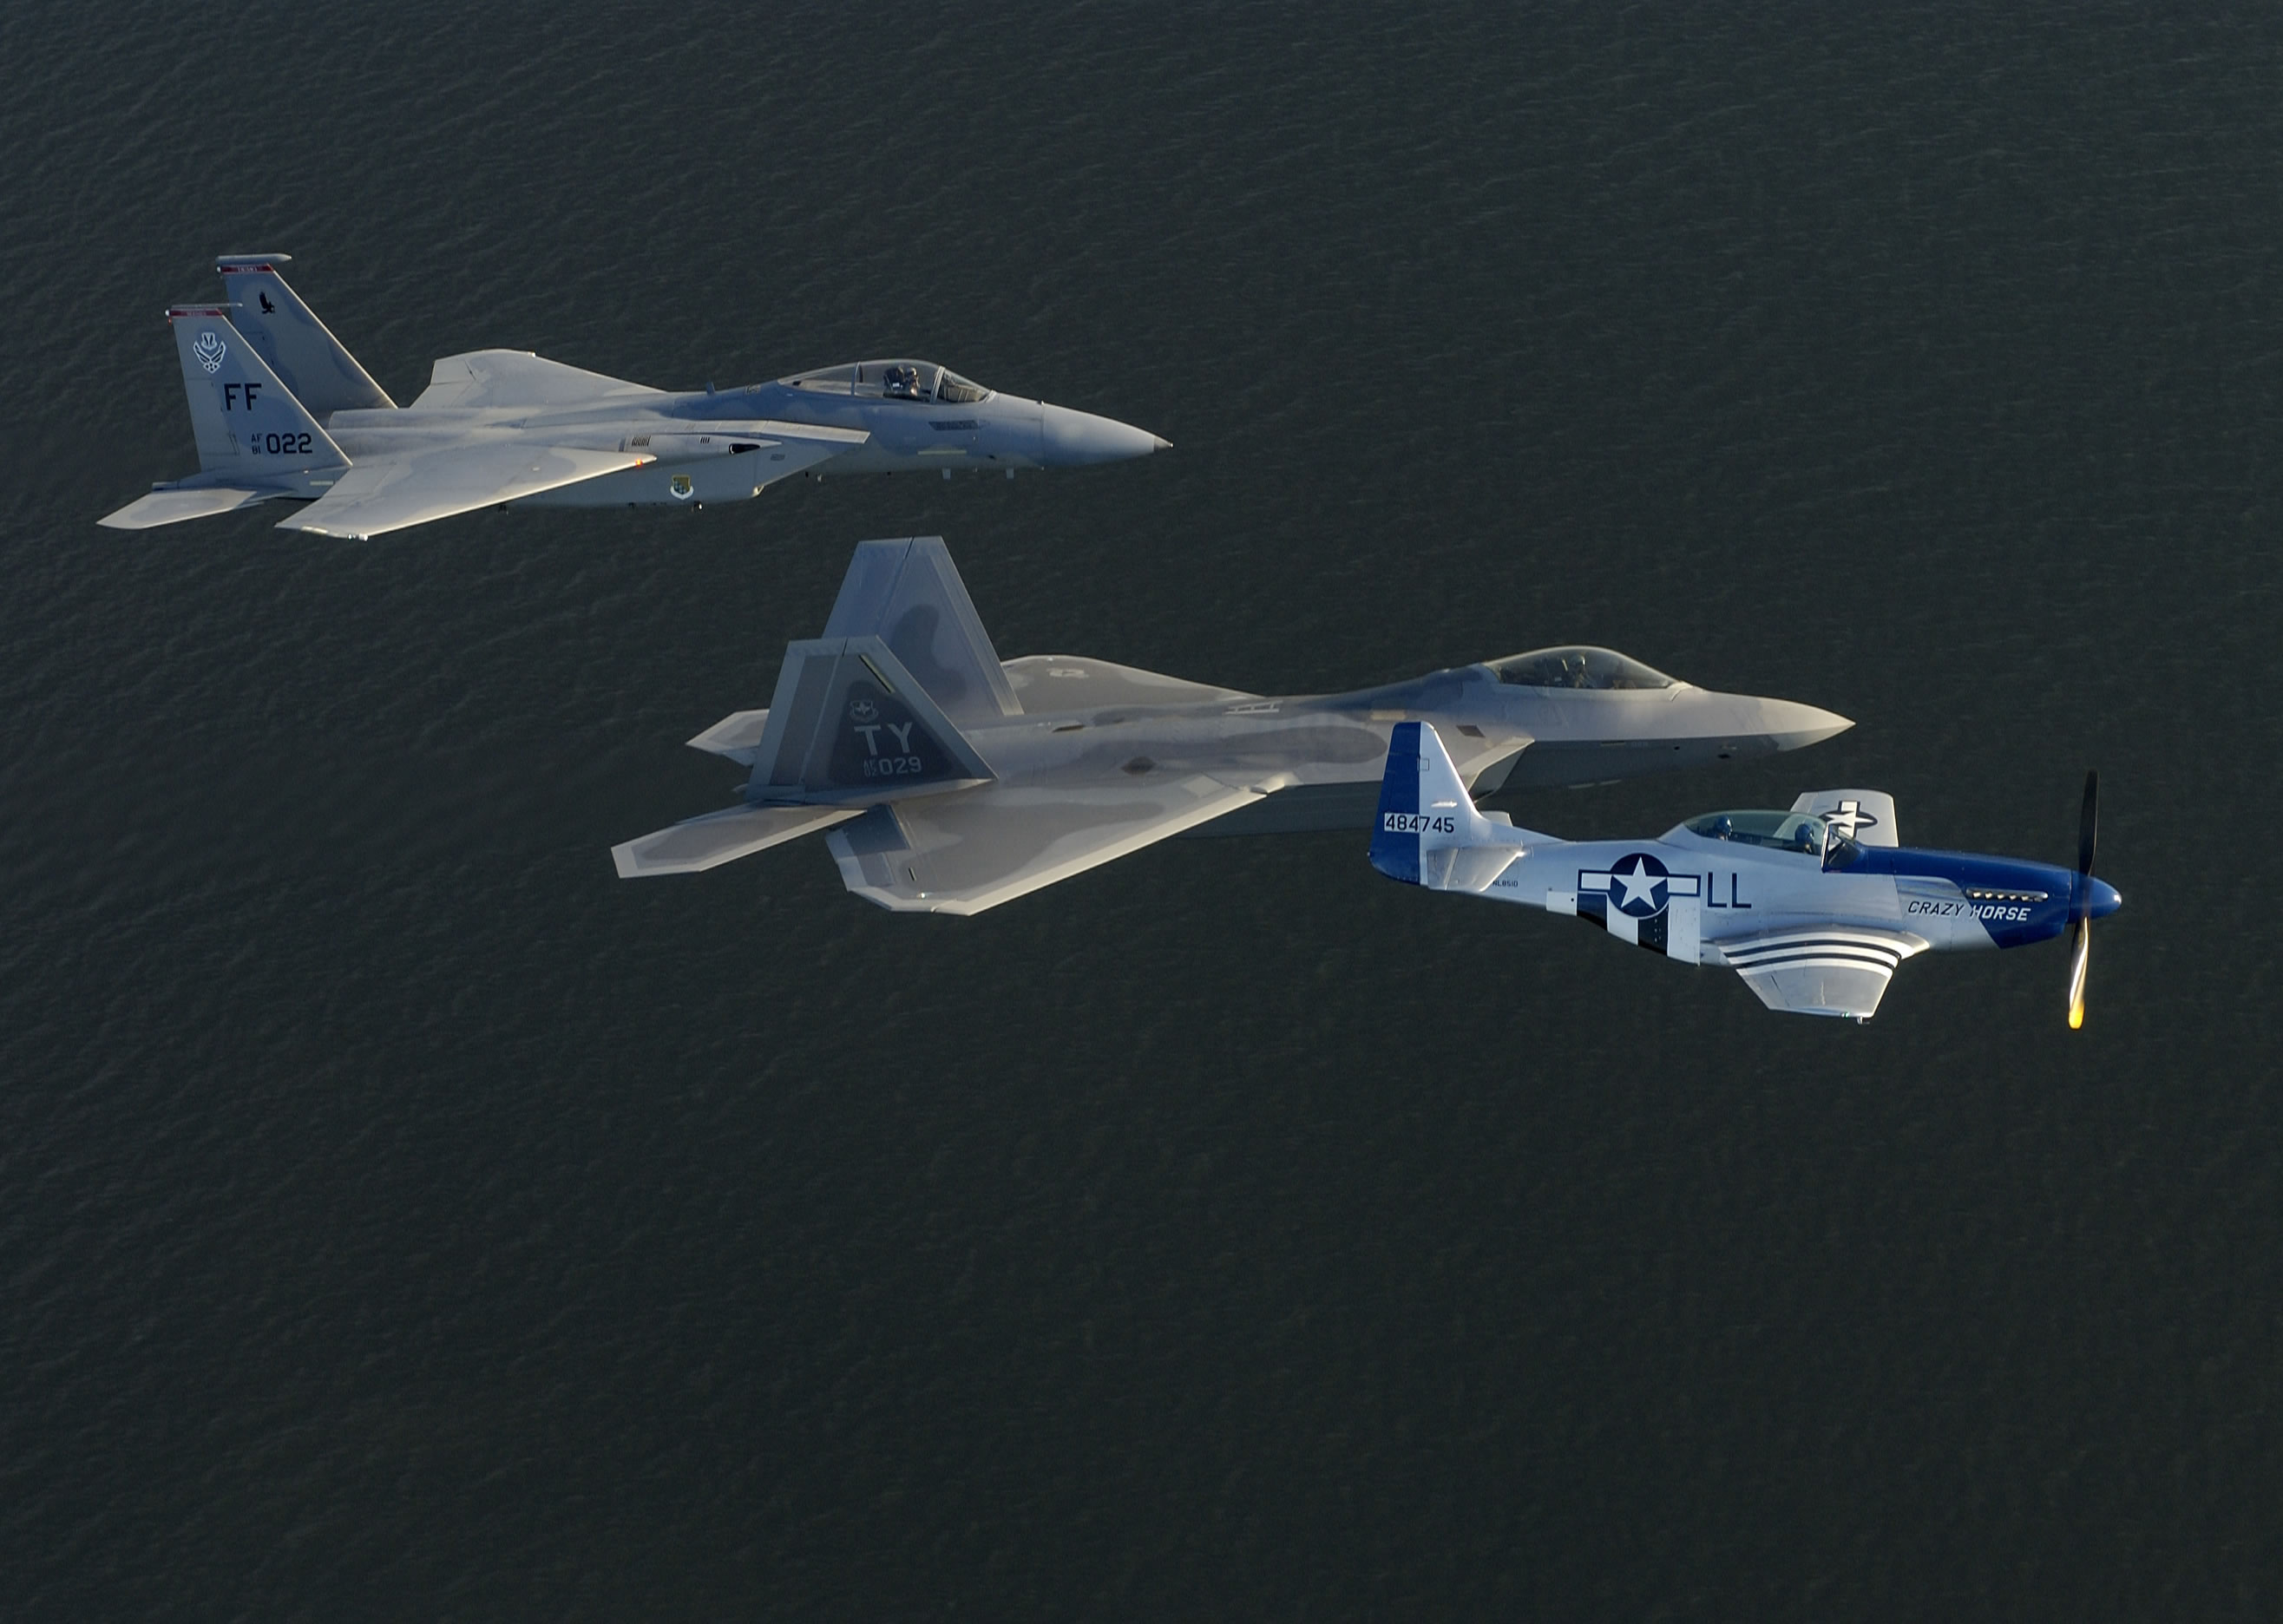 Free Military Desktop Wallpaper - Bombers, Fighter Jets and more Photos2631 x 1872